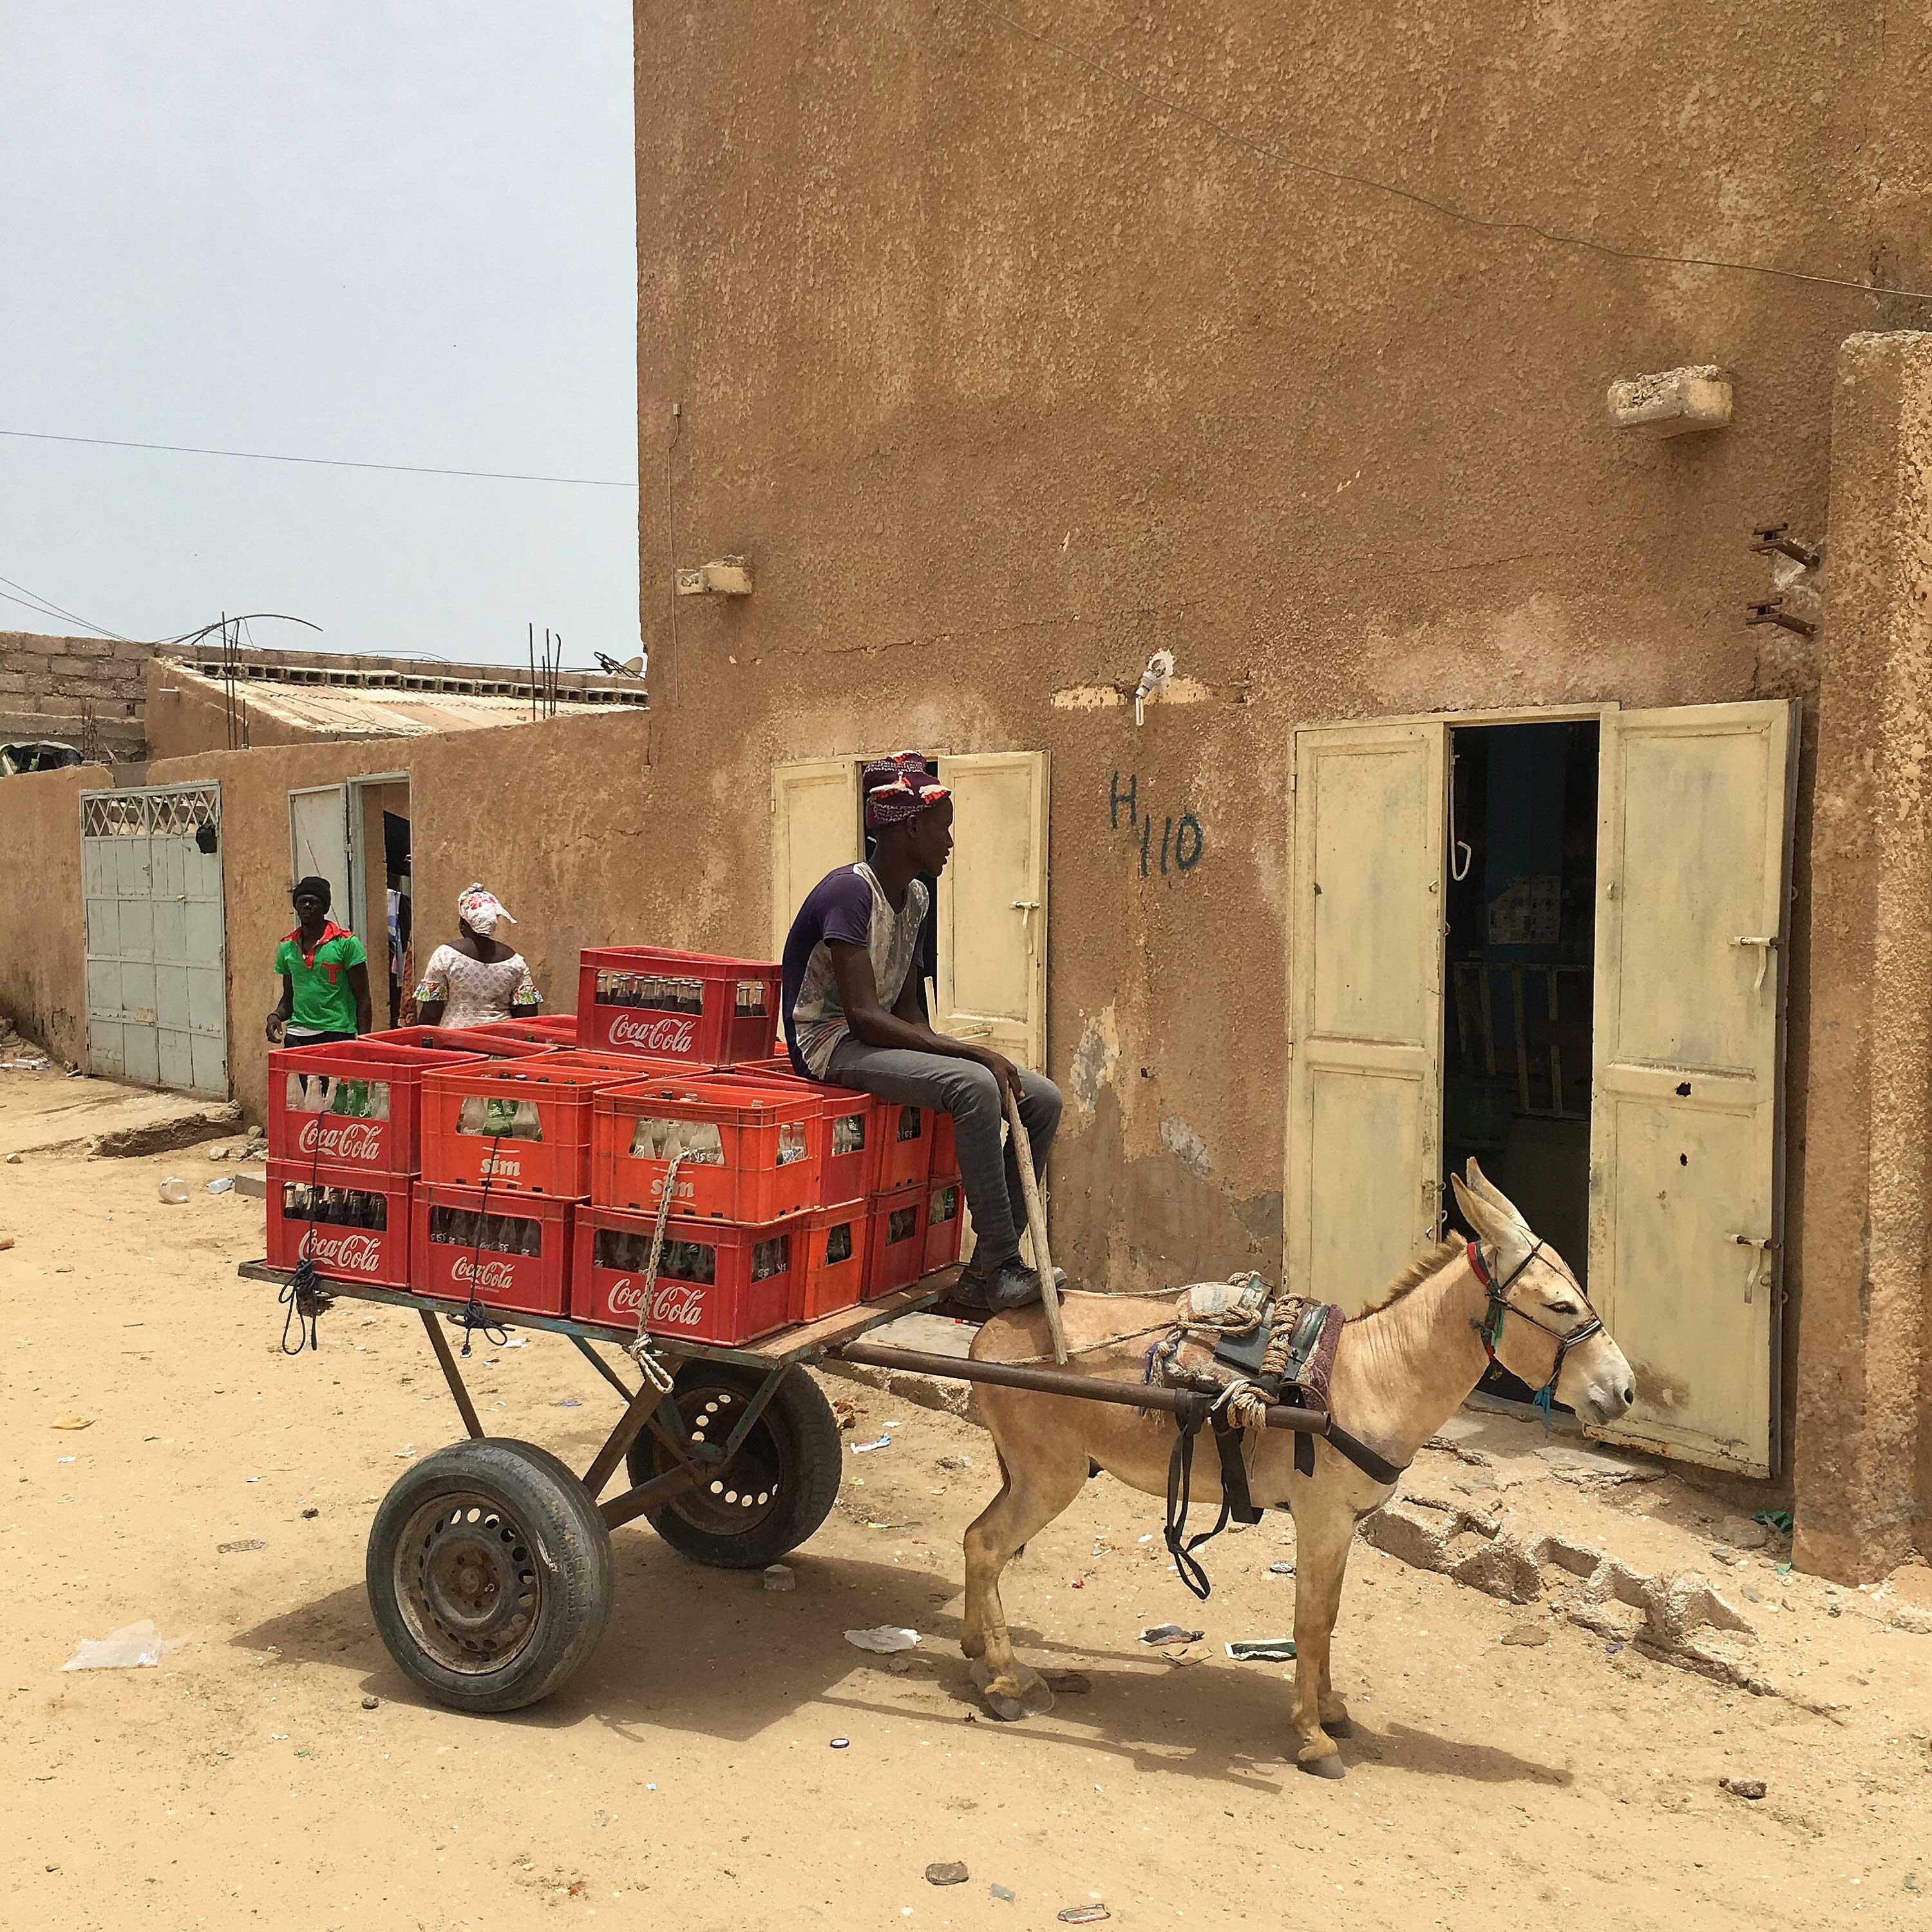 Aziz makes [f500link]Coca-Cola[/f500link] deliveries with his donkey in Nouakchott, Mauritania. ((@dcoreraphotography))